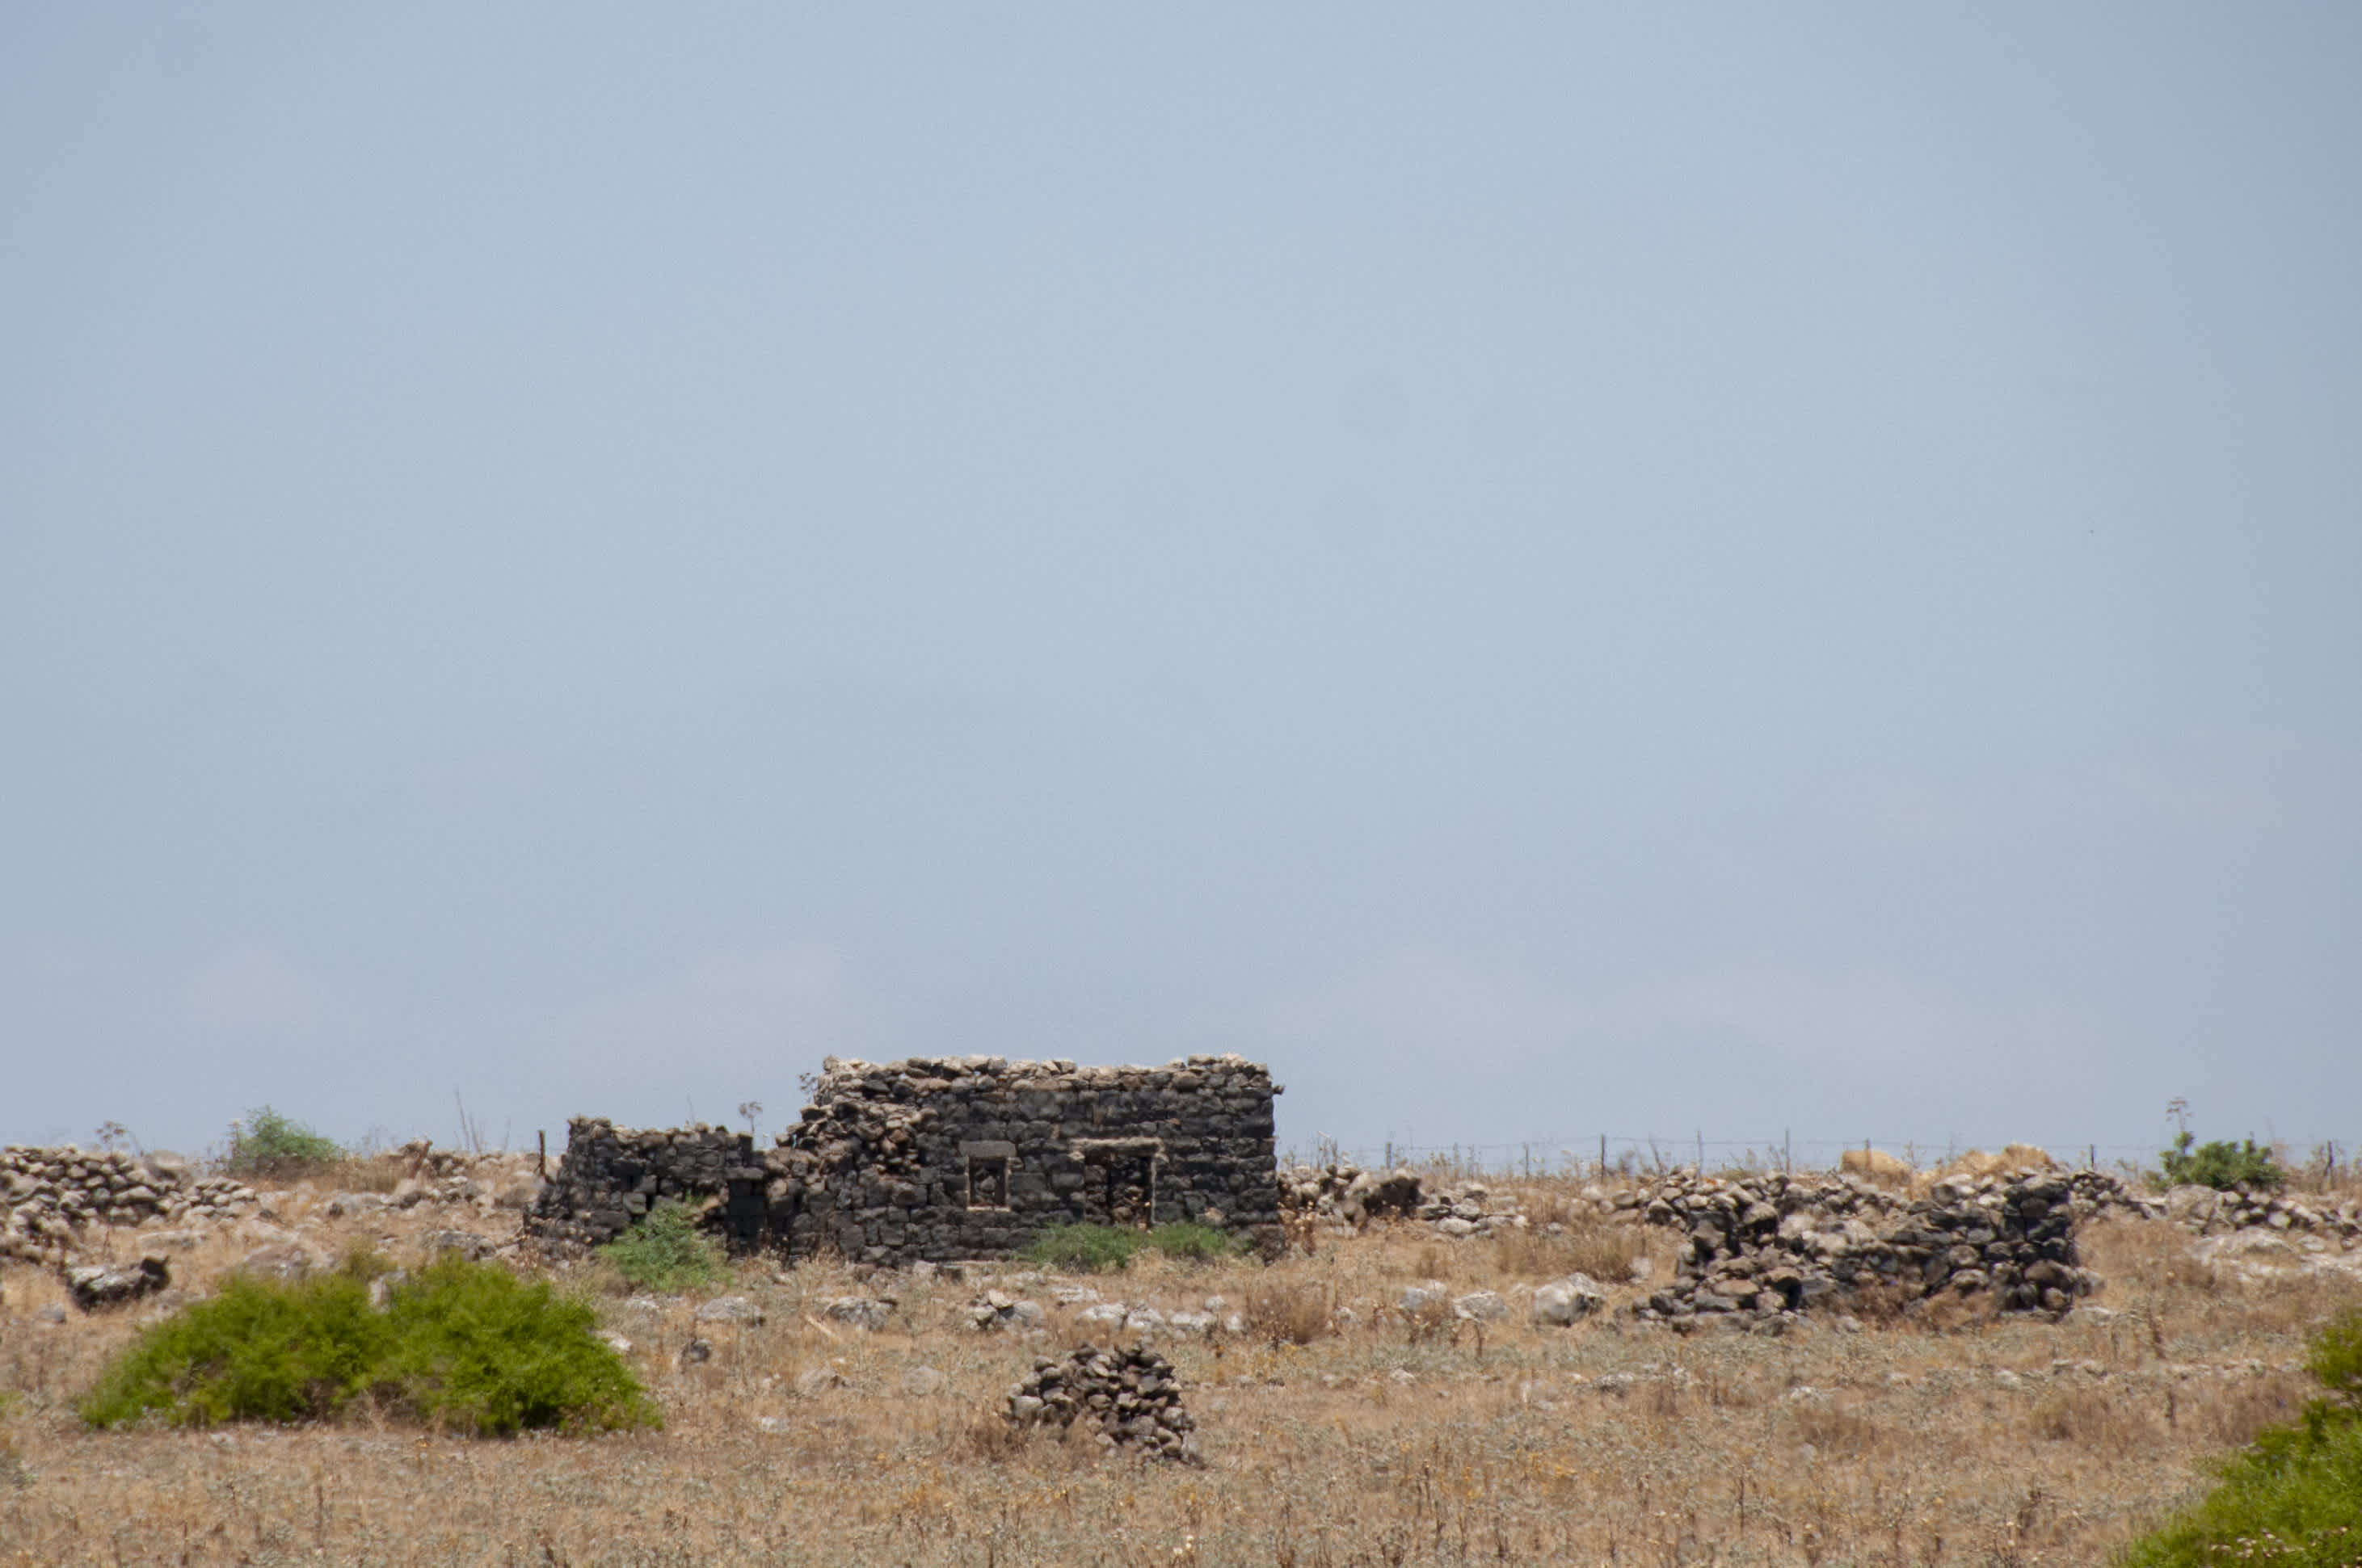 abandoned building in a brown field near Jilabun Stream in the Golan Heights, Israel. #Israel #GolanHeights #Abandoned #Decay